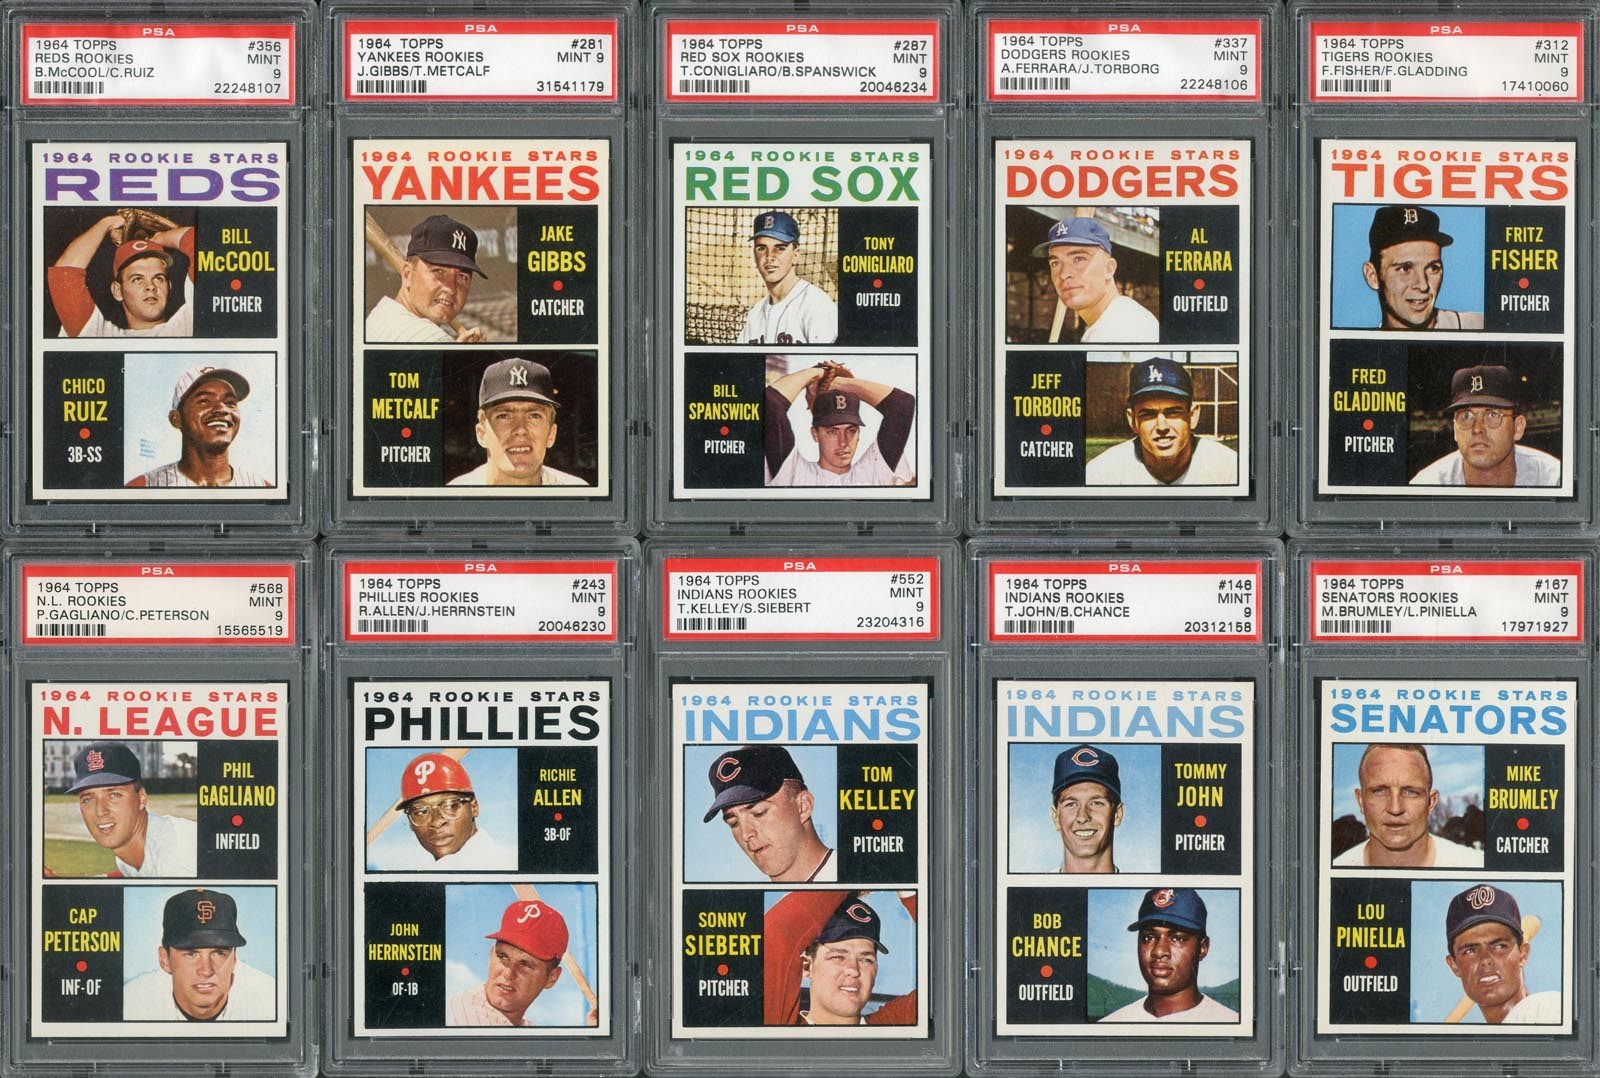 Baseball and Trading Cards - 1964 Topps PSA MINT 9 Rookies (14)